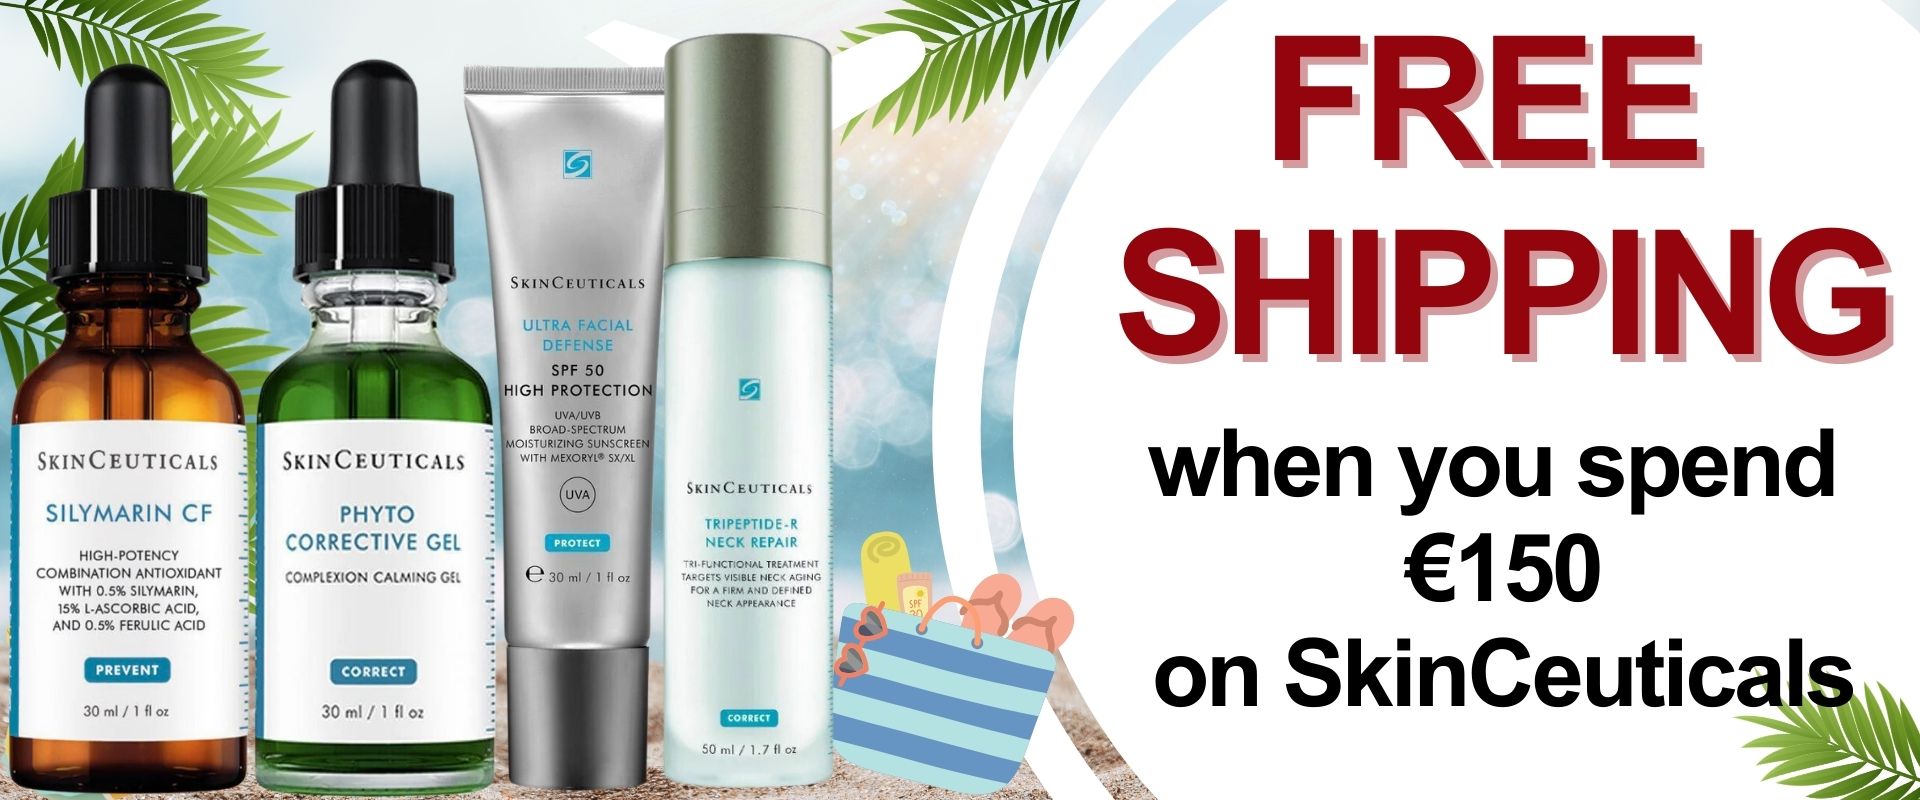 Free International Shipping if you spend 150€ on SkinCeuticals - For example, Silymarin CF Serum and Phyto Corrective Gel.